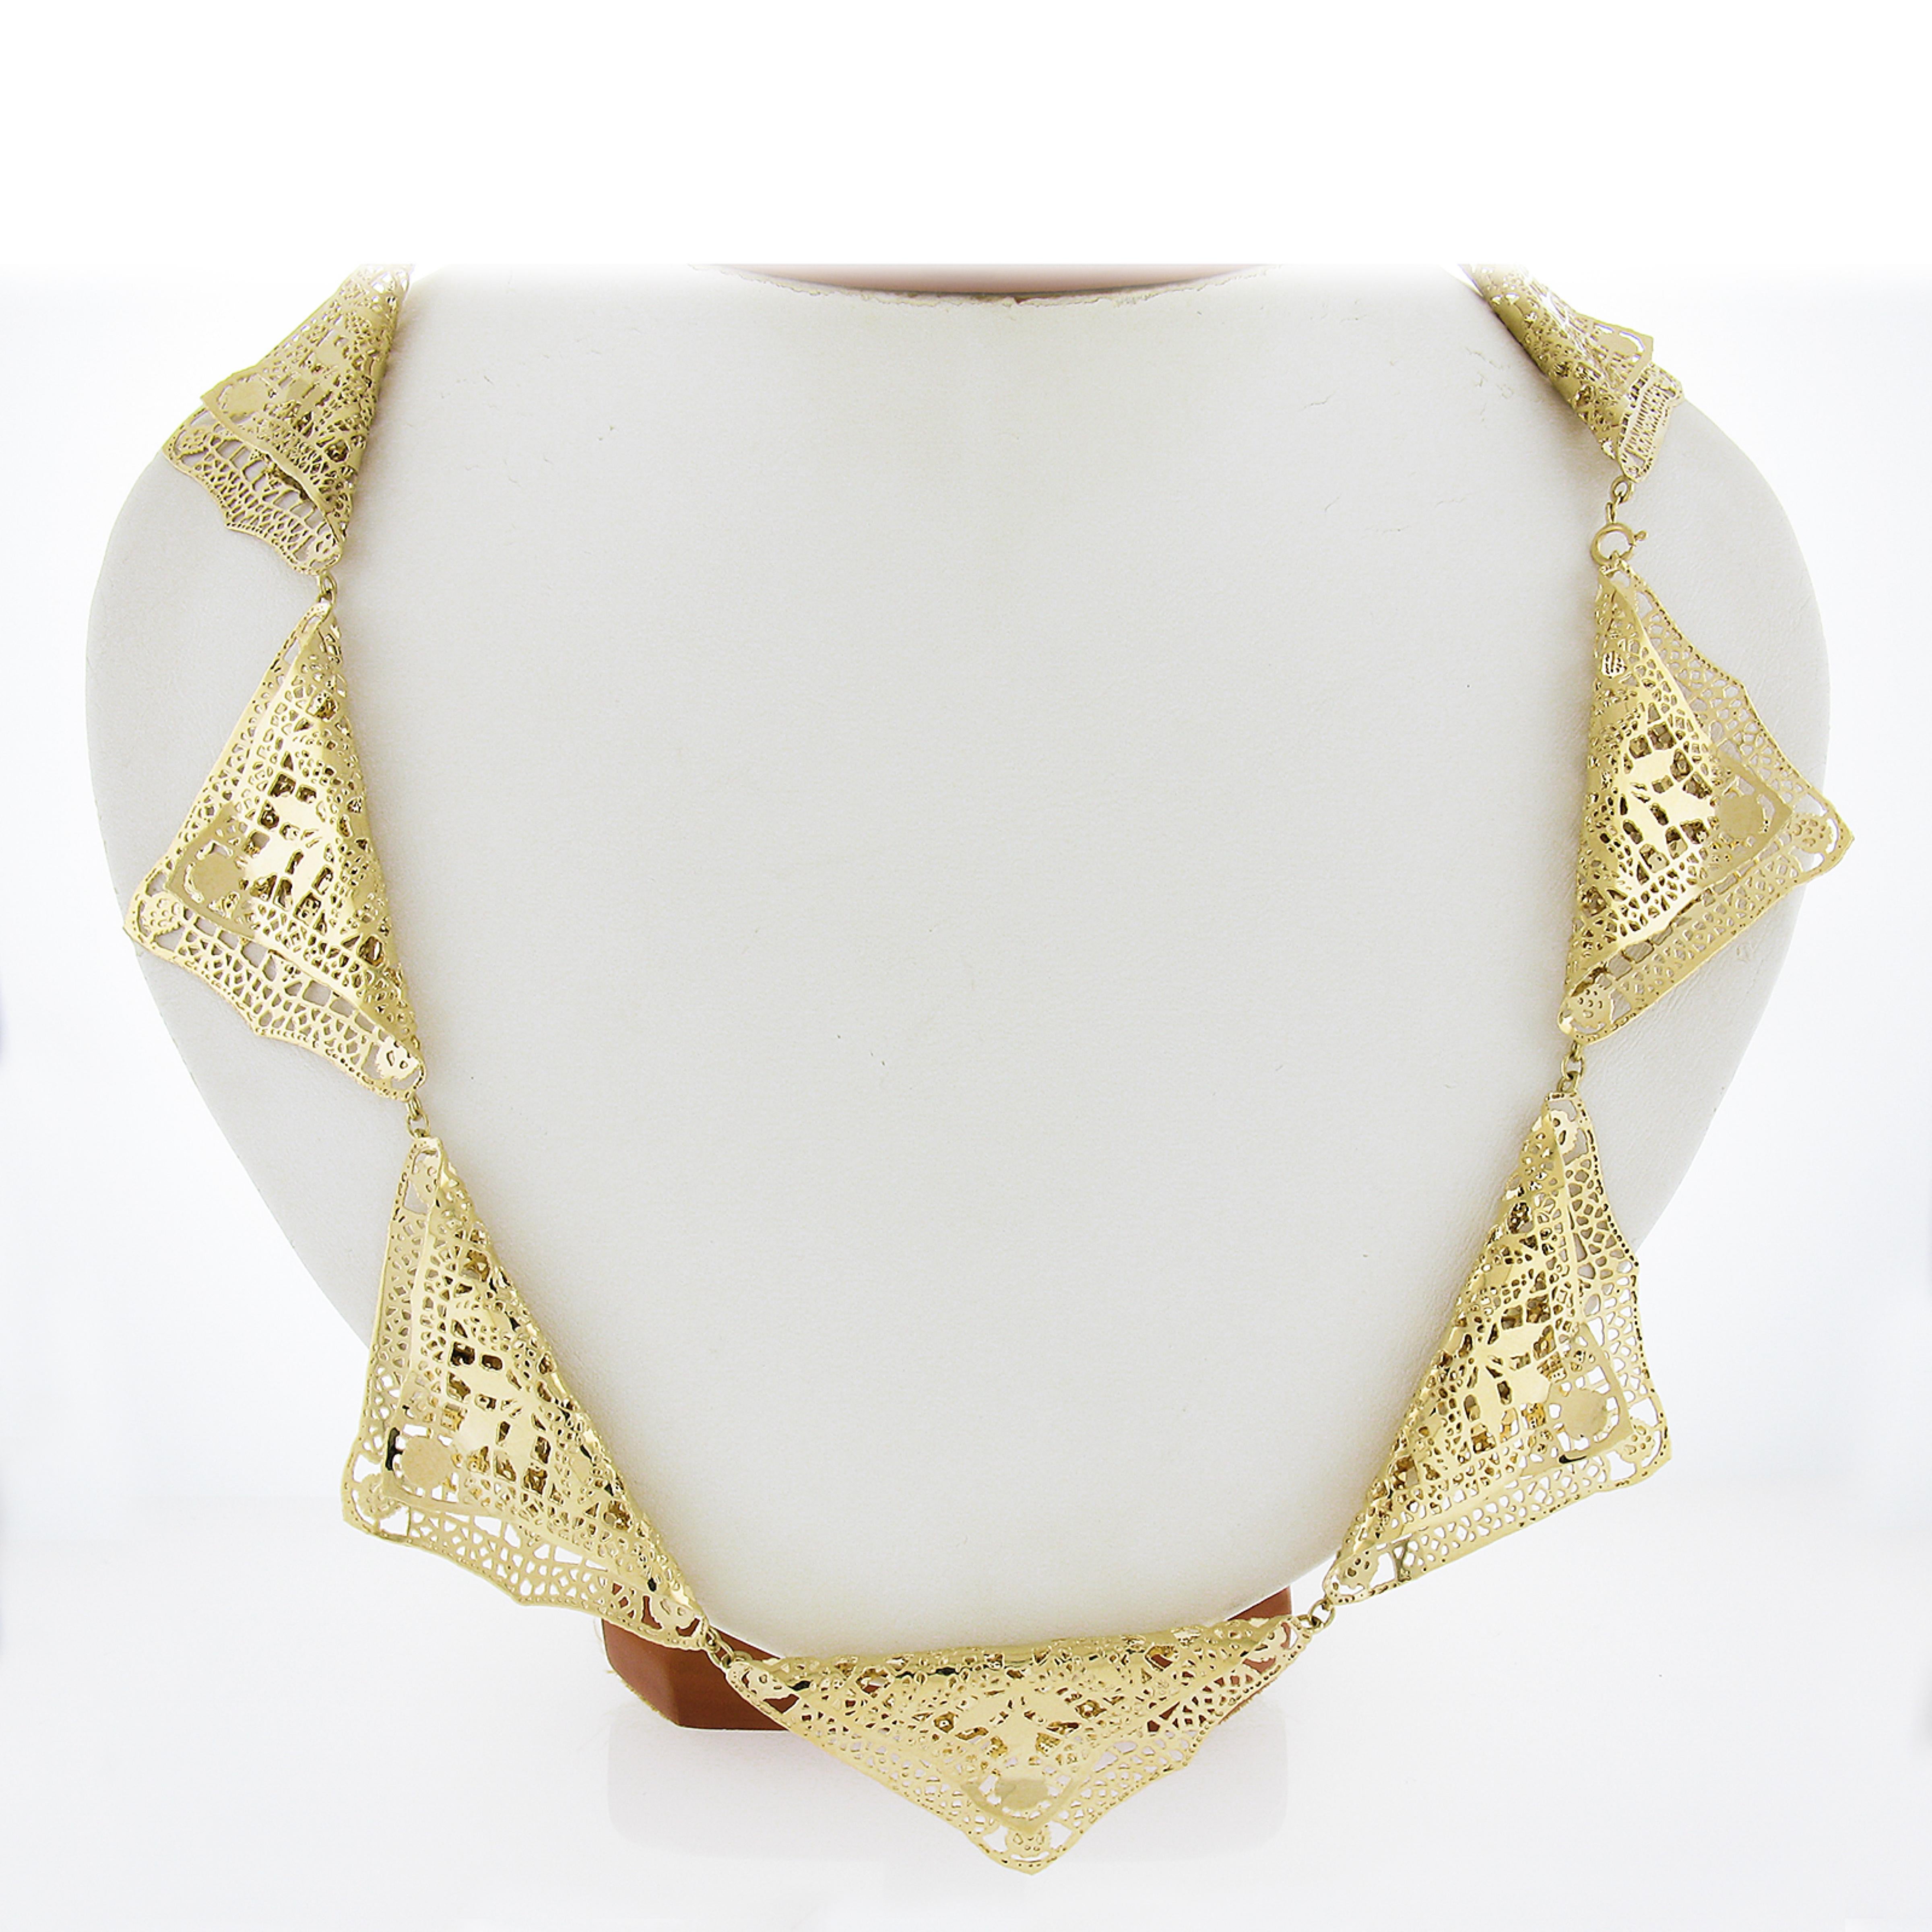 Very unusual folded open work lace like gold work in a triangular shape all the way around creating a unique necklace! High polished finish - this necklace is ready to take any outfit to the next level! Enjoy!

Material: Solid 14k Yellow